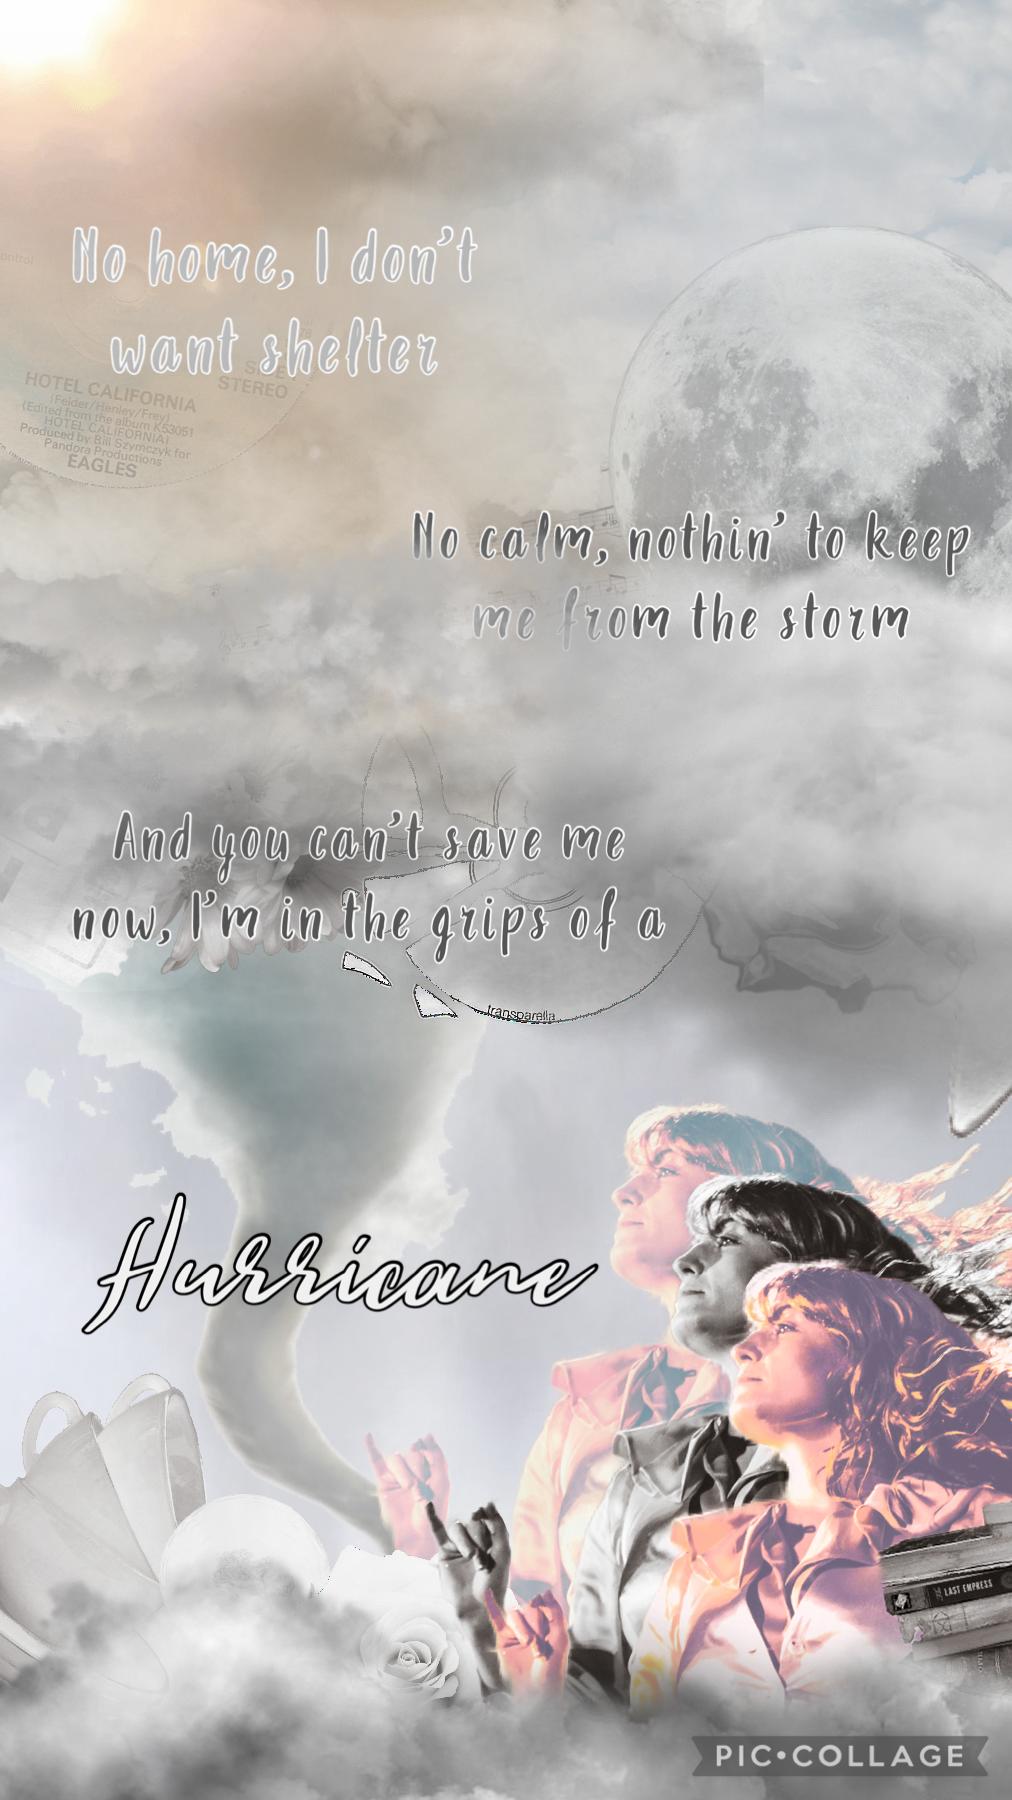 ☁️🅃🄰🄿🌪

Florence + Machine collage

From the song “Hurricane Drunk“

““No home, I don’t want shelter, No calm, nothin’ to keep me from the storm, and you can’t hold me down ’cause I belong to the hurricane“